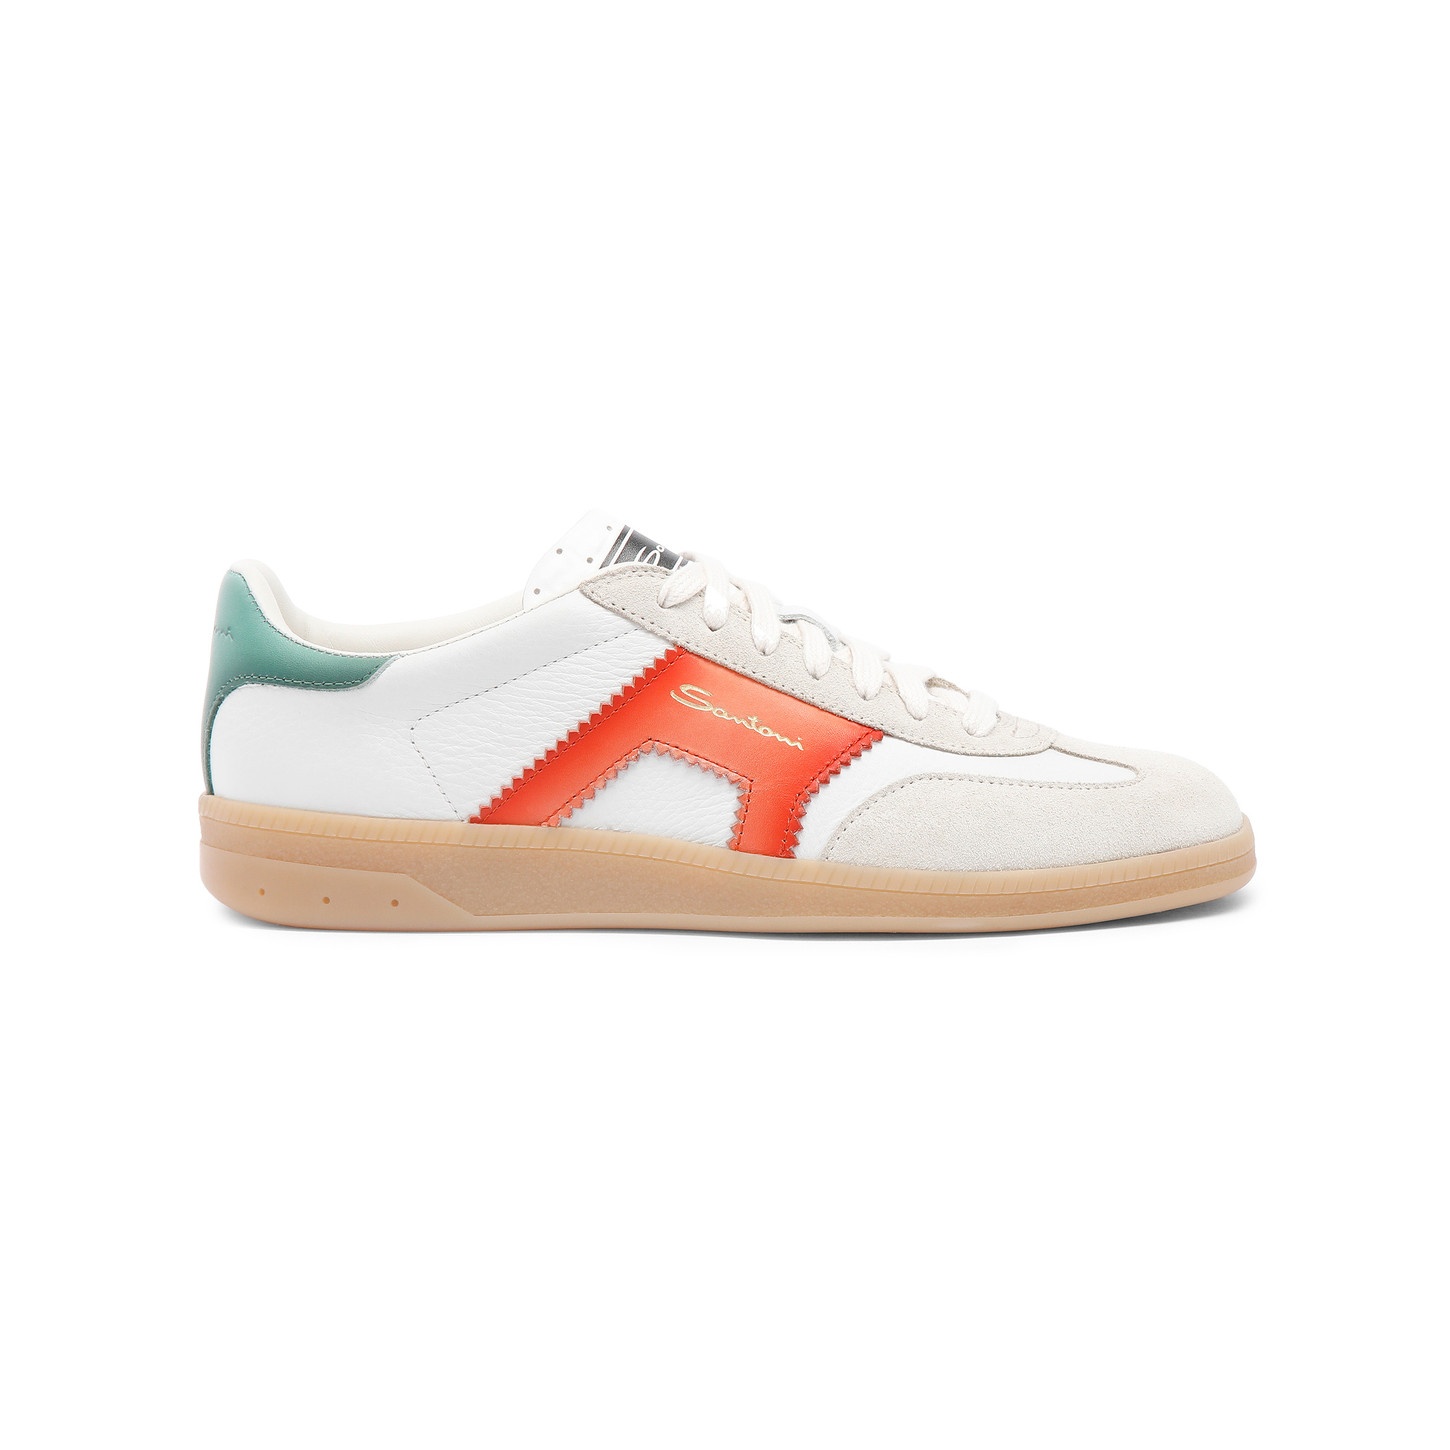 Women's white, orange and green leather and suede DBS Oly sneaker - 1